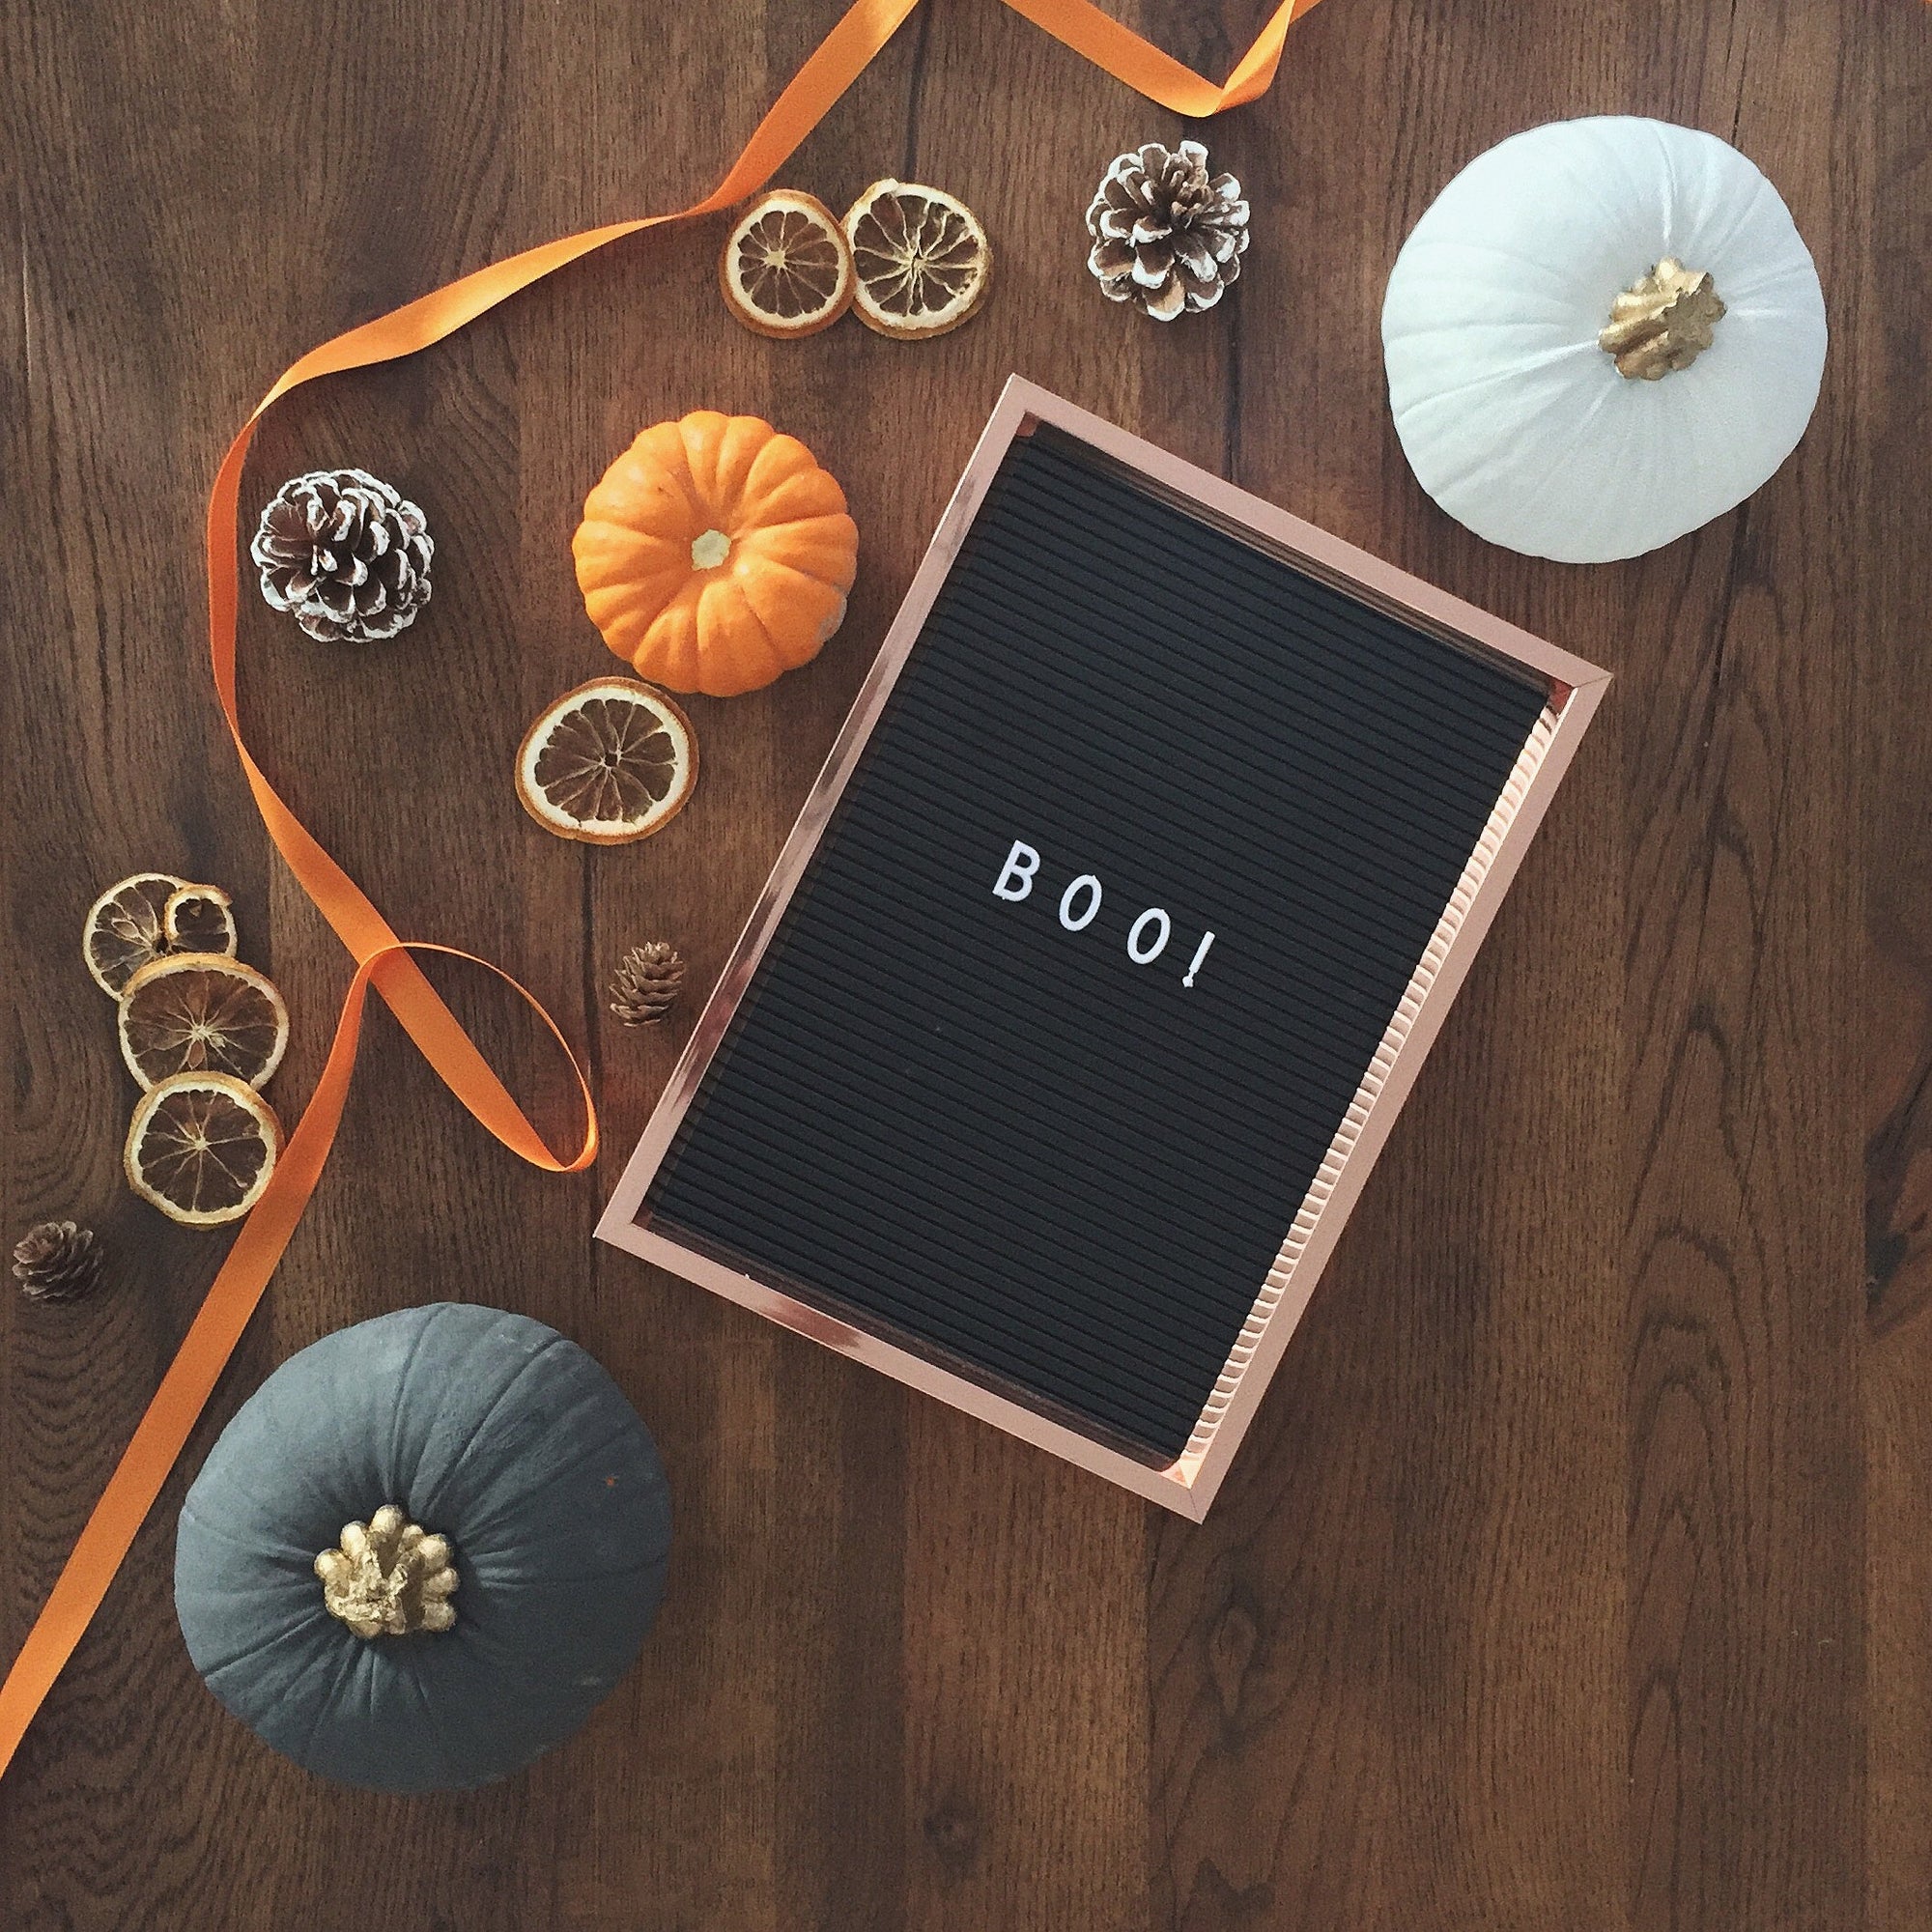 Halloween ideas for kids in the time of Covid